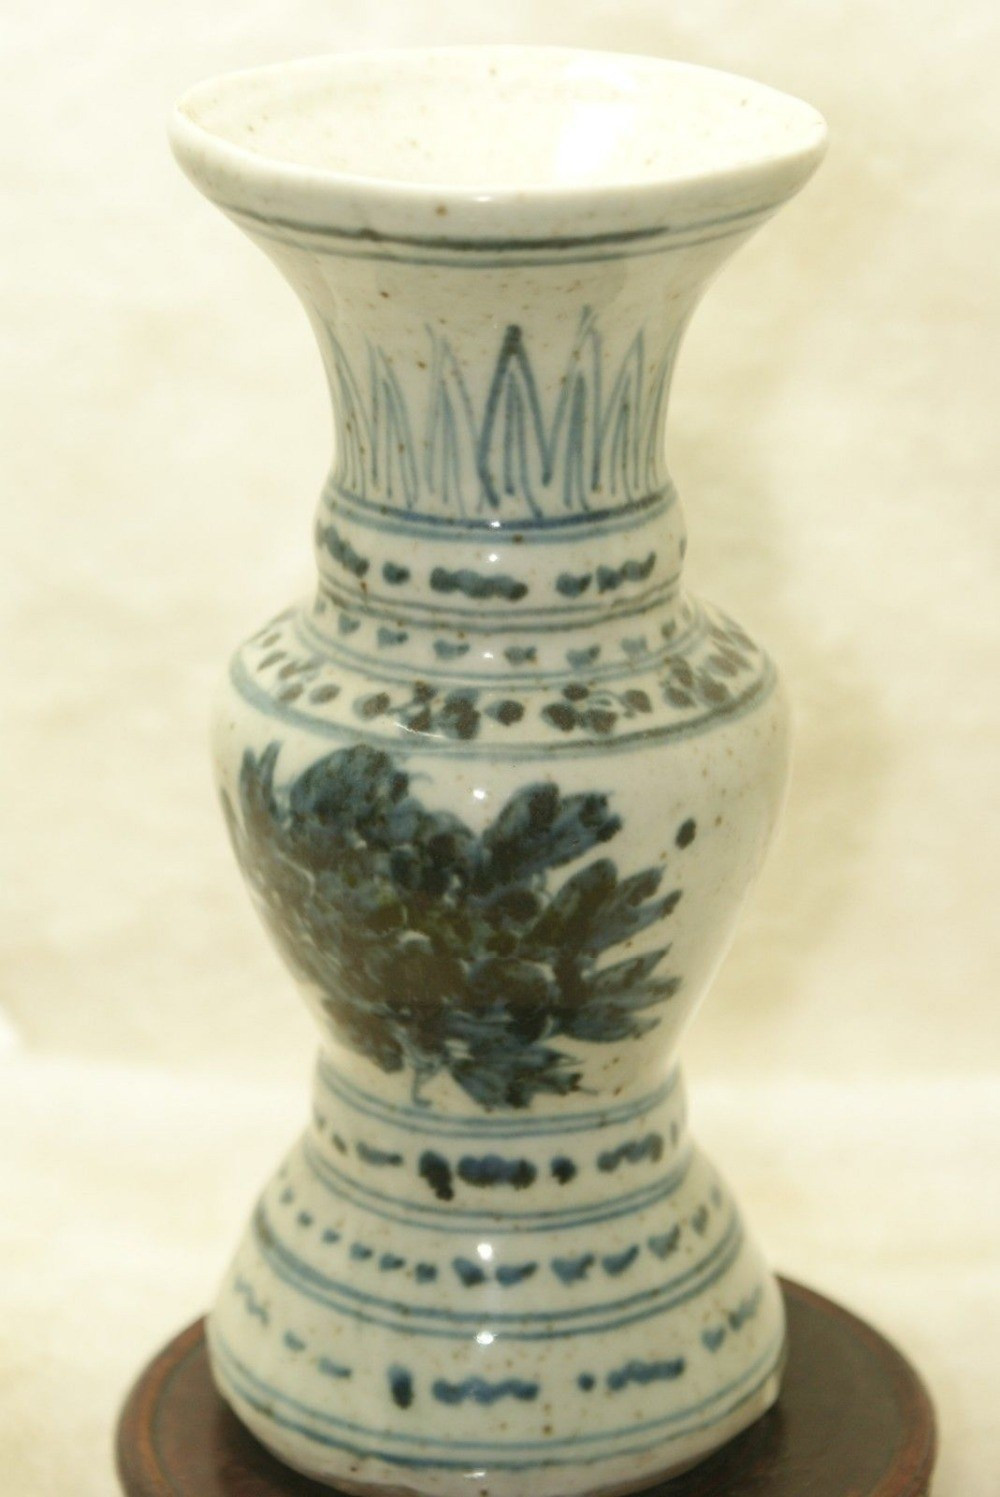 18 Great 6x6 Cylinder Vase 2024 free download 6x6 cylinder vase of ac297c29afree shipping chinese antique porcelain vases and porcelain vases with regard to 289f 289a 289b 289c 289d 289e